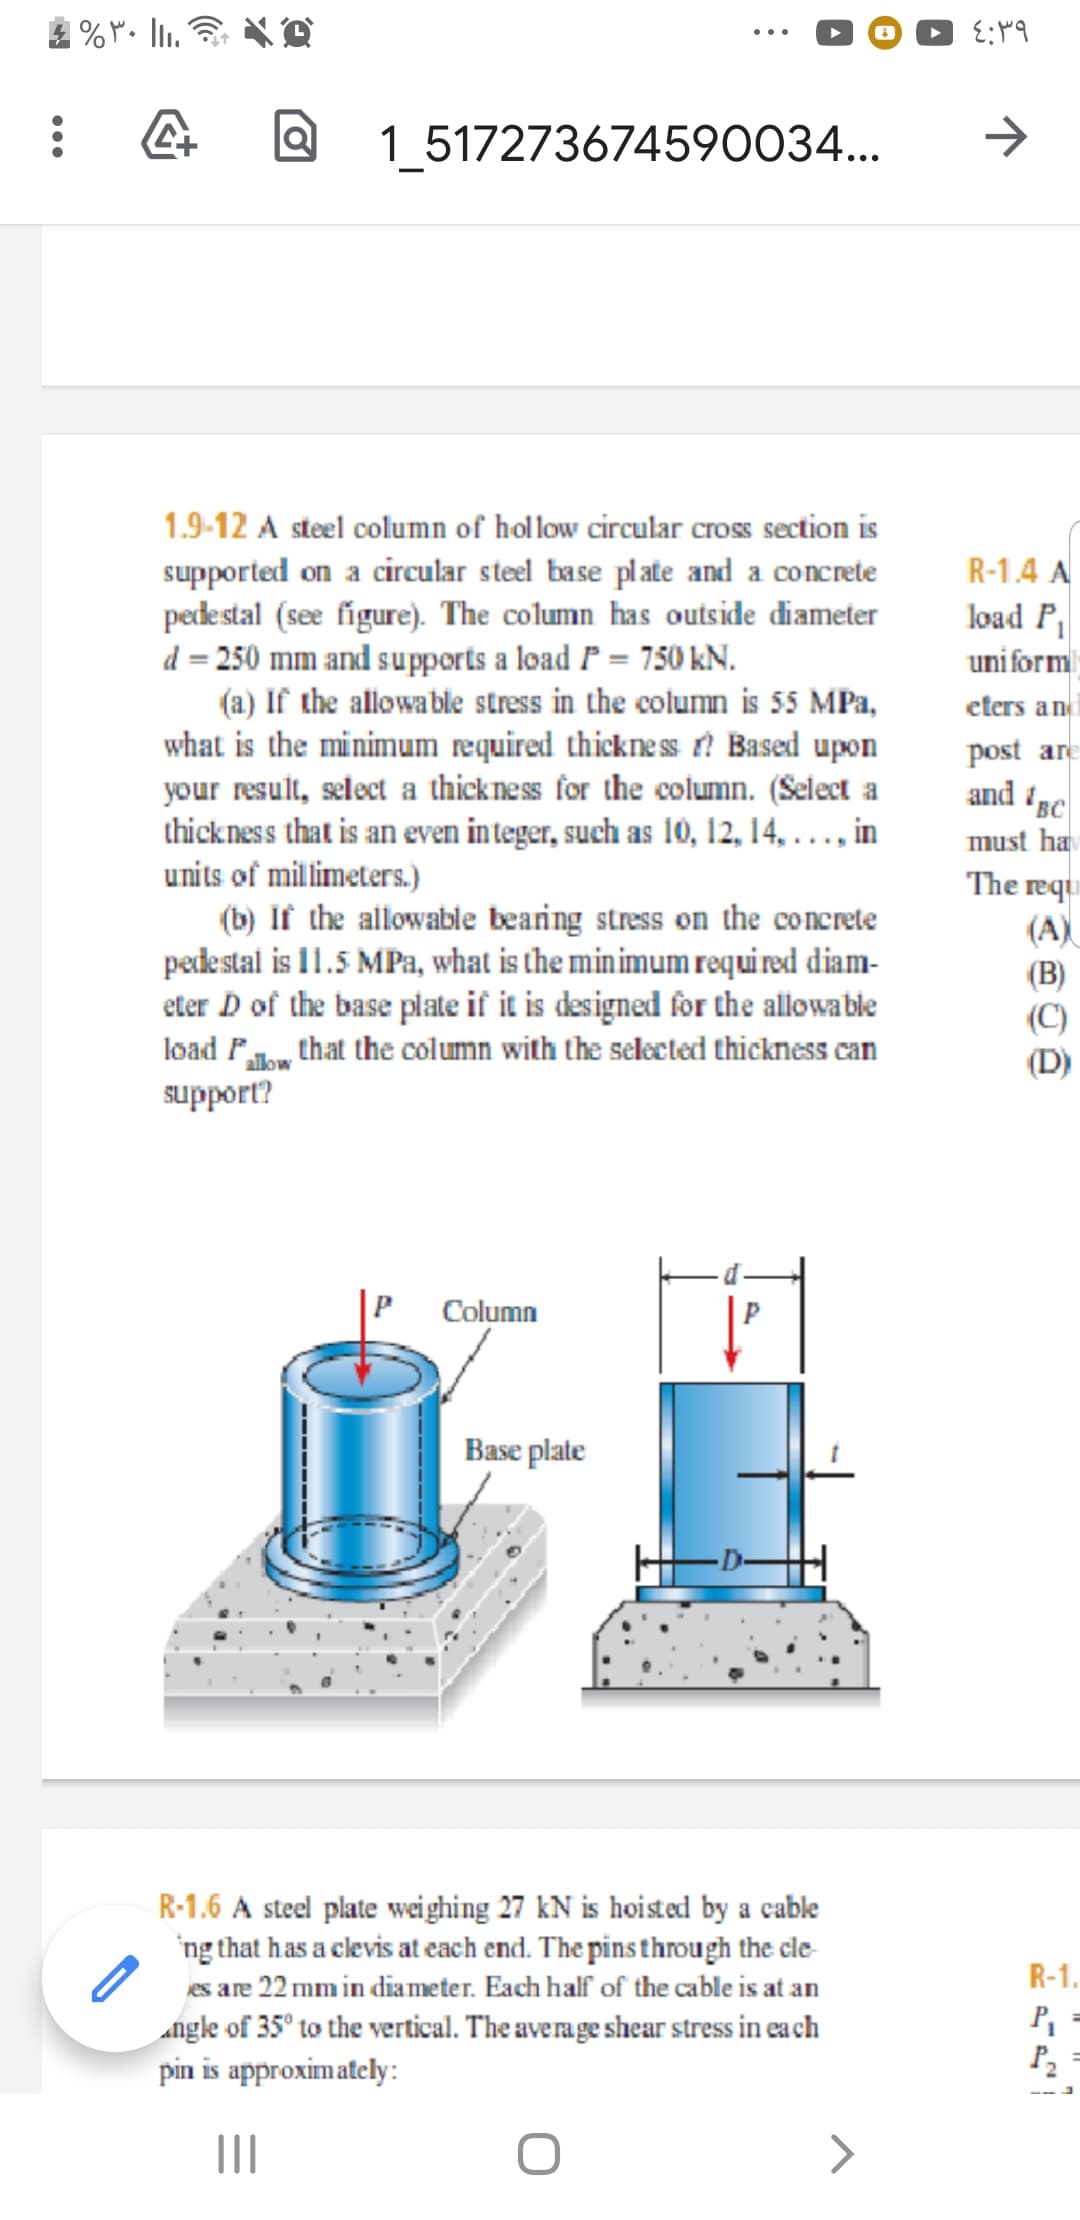 1 517273674590034...
1.9-12 A steel column of hollow circular cross section is
R-1.4 A
load P
uni form
supported on a circular steel base plate and a concrete
pedestal (see figure). The column has outside diameter
d = 250 mm and supports a load P = 750 kN.
(a) If the allowable stress in the column is 55 MPa,
what is the minimum required thickness ? Based upon
your result, select a thickness for the column. (Select a
thickness that is an even integer, such as 10, 12, 14, . .., in
units of millimeters.)
(b) If the allowable bearing stress on the concrete
pedestal is 11.5 MPa, what is the min imum requi red diam-
eter D of the base plate if it is designed for the allowable
load P that the column with the selected thickness can
support?
eters an
post are
and 'BC
must ha
The reqi
(A)
(B)
(C)
(D)
Column
Base plate
R-1.6 A steel plate wei ghing 27 kN is hoisted by a cable
'ng that has a clevis at each end. The pins through the cle
es are 22 mm in diameter. Each half of the cable is at an
R-1.
Angle of 35° to the vertical. The average shear stress in ea ch
pin is approximately:
P,
P2
II
>
